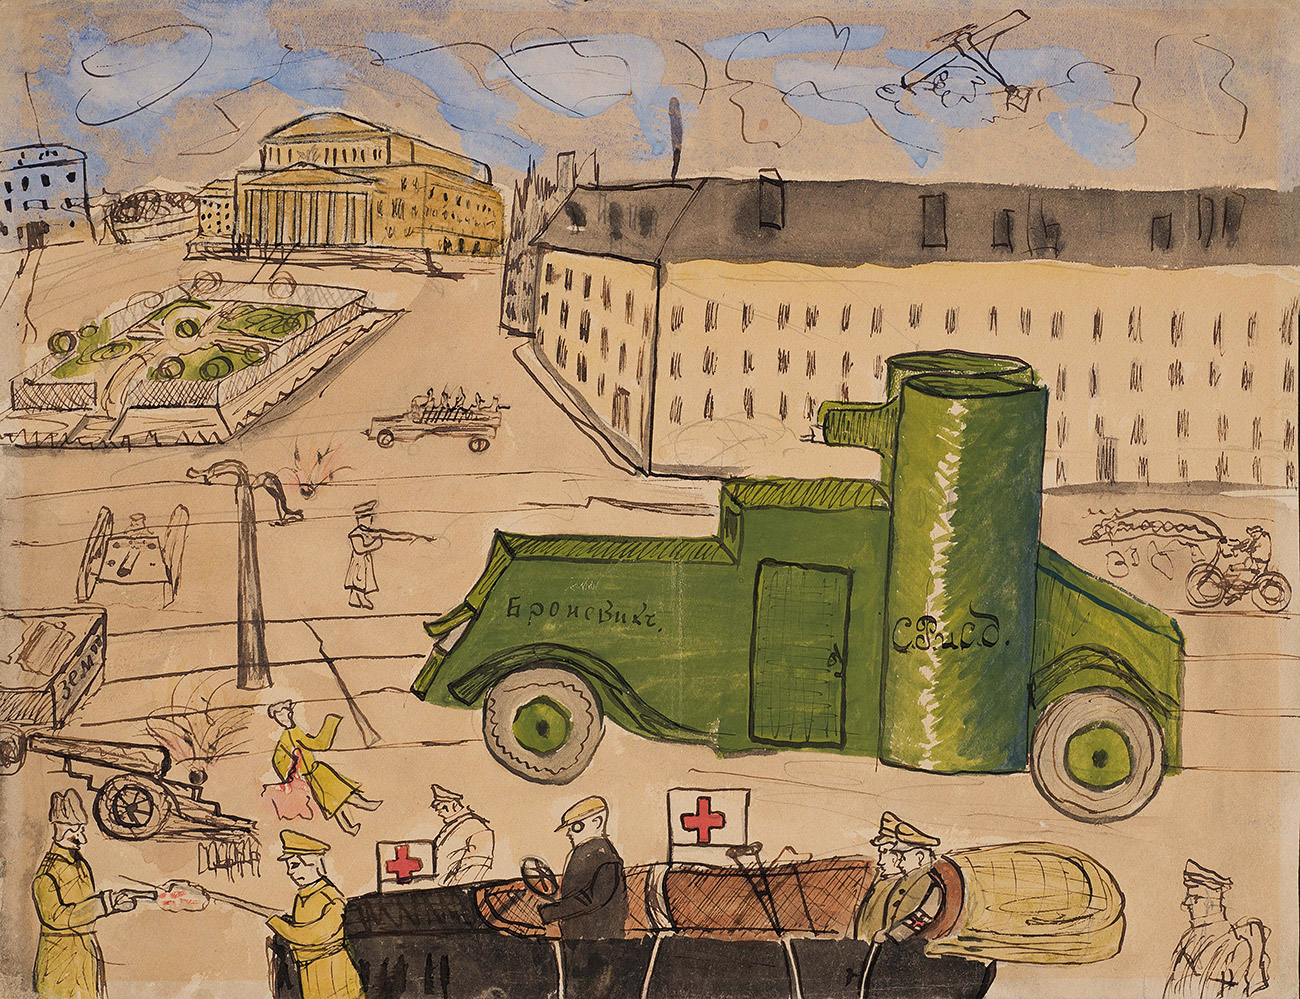 This collection of than 150 drawings was given to the Moscow Historical Museum in 1919 by the scholar Vasily Voronov. // “Battle of Teatralny Square”, Moscow, October-November 1917